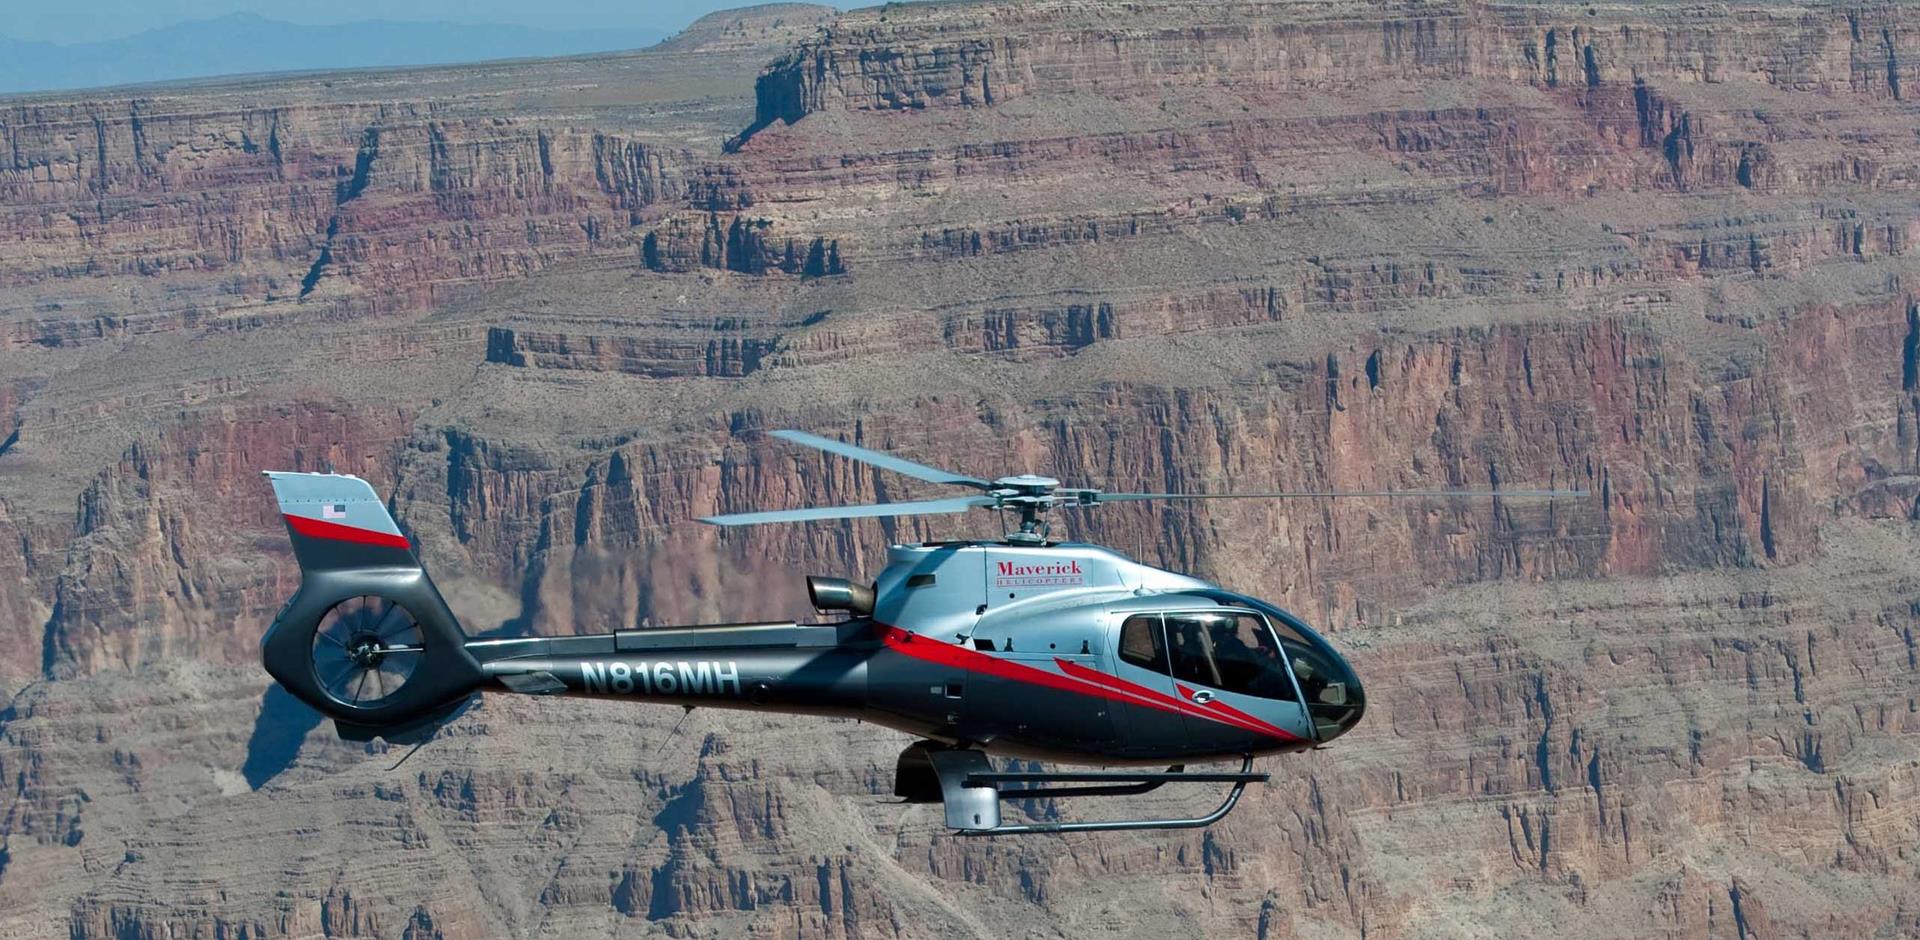 A&K experience: Grand Canyon helicopter tour and landing, Las Vegas, Nevada, USA